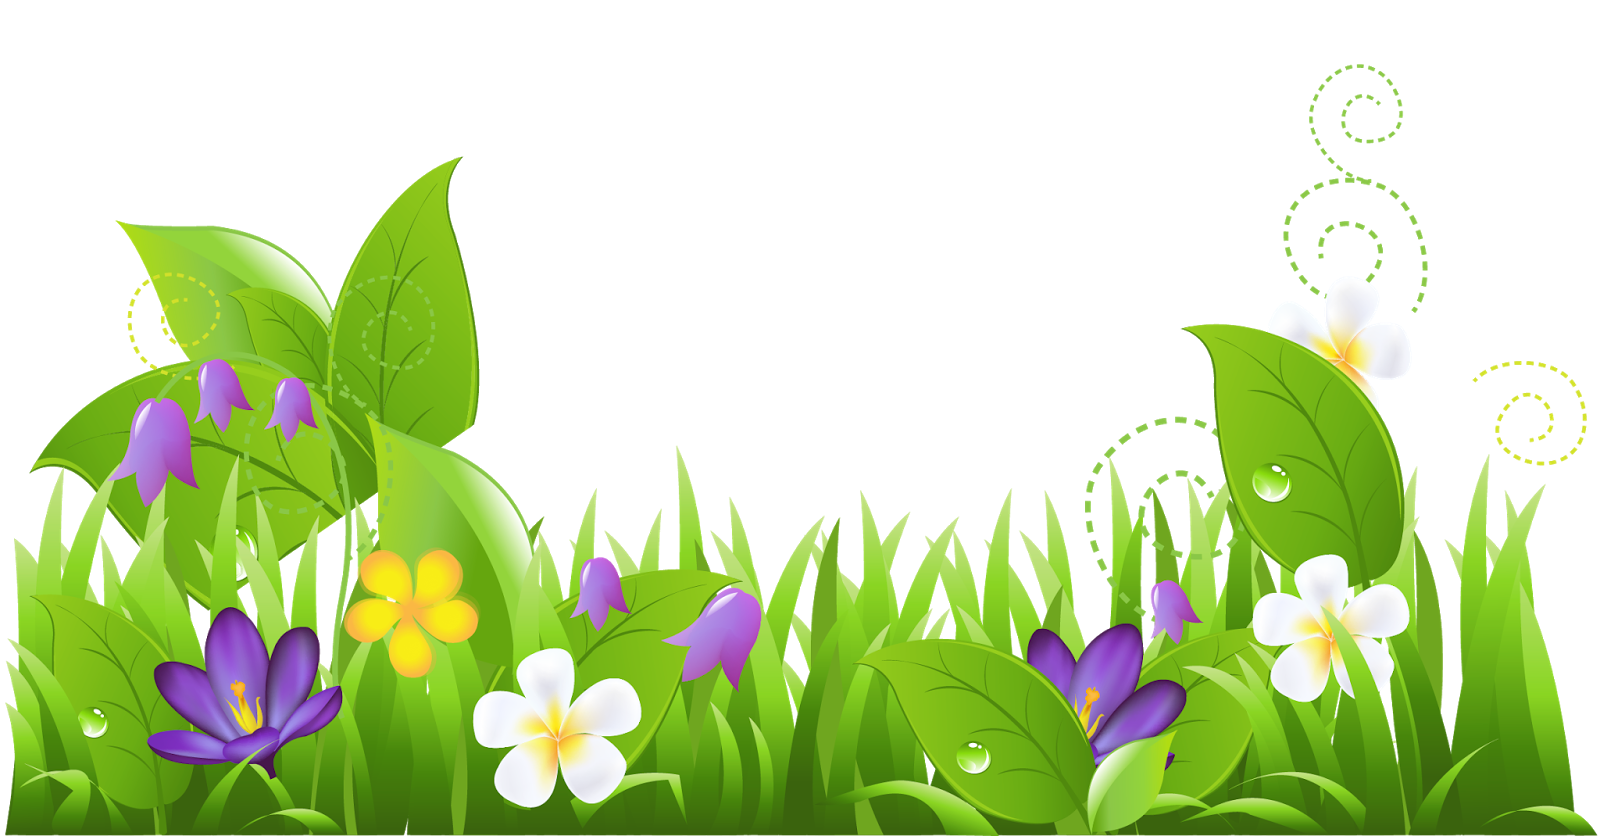 spring image clipart - photo #47